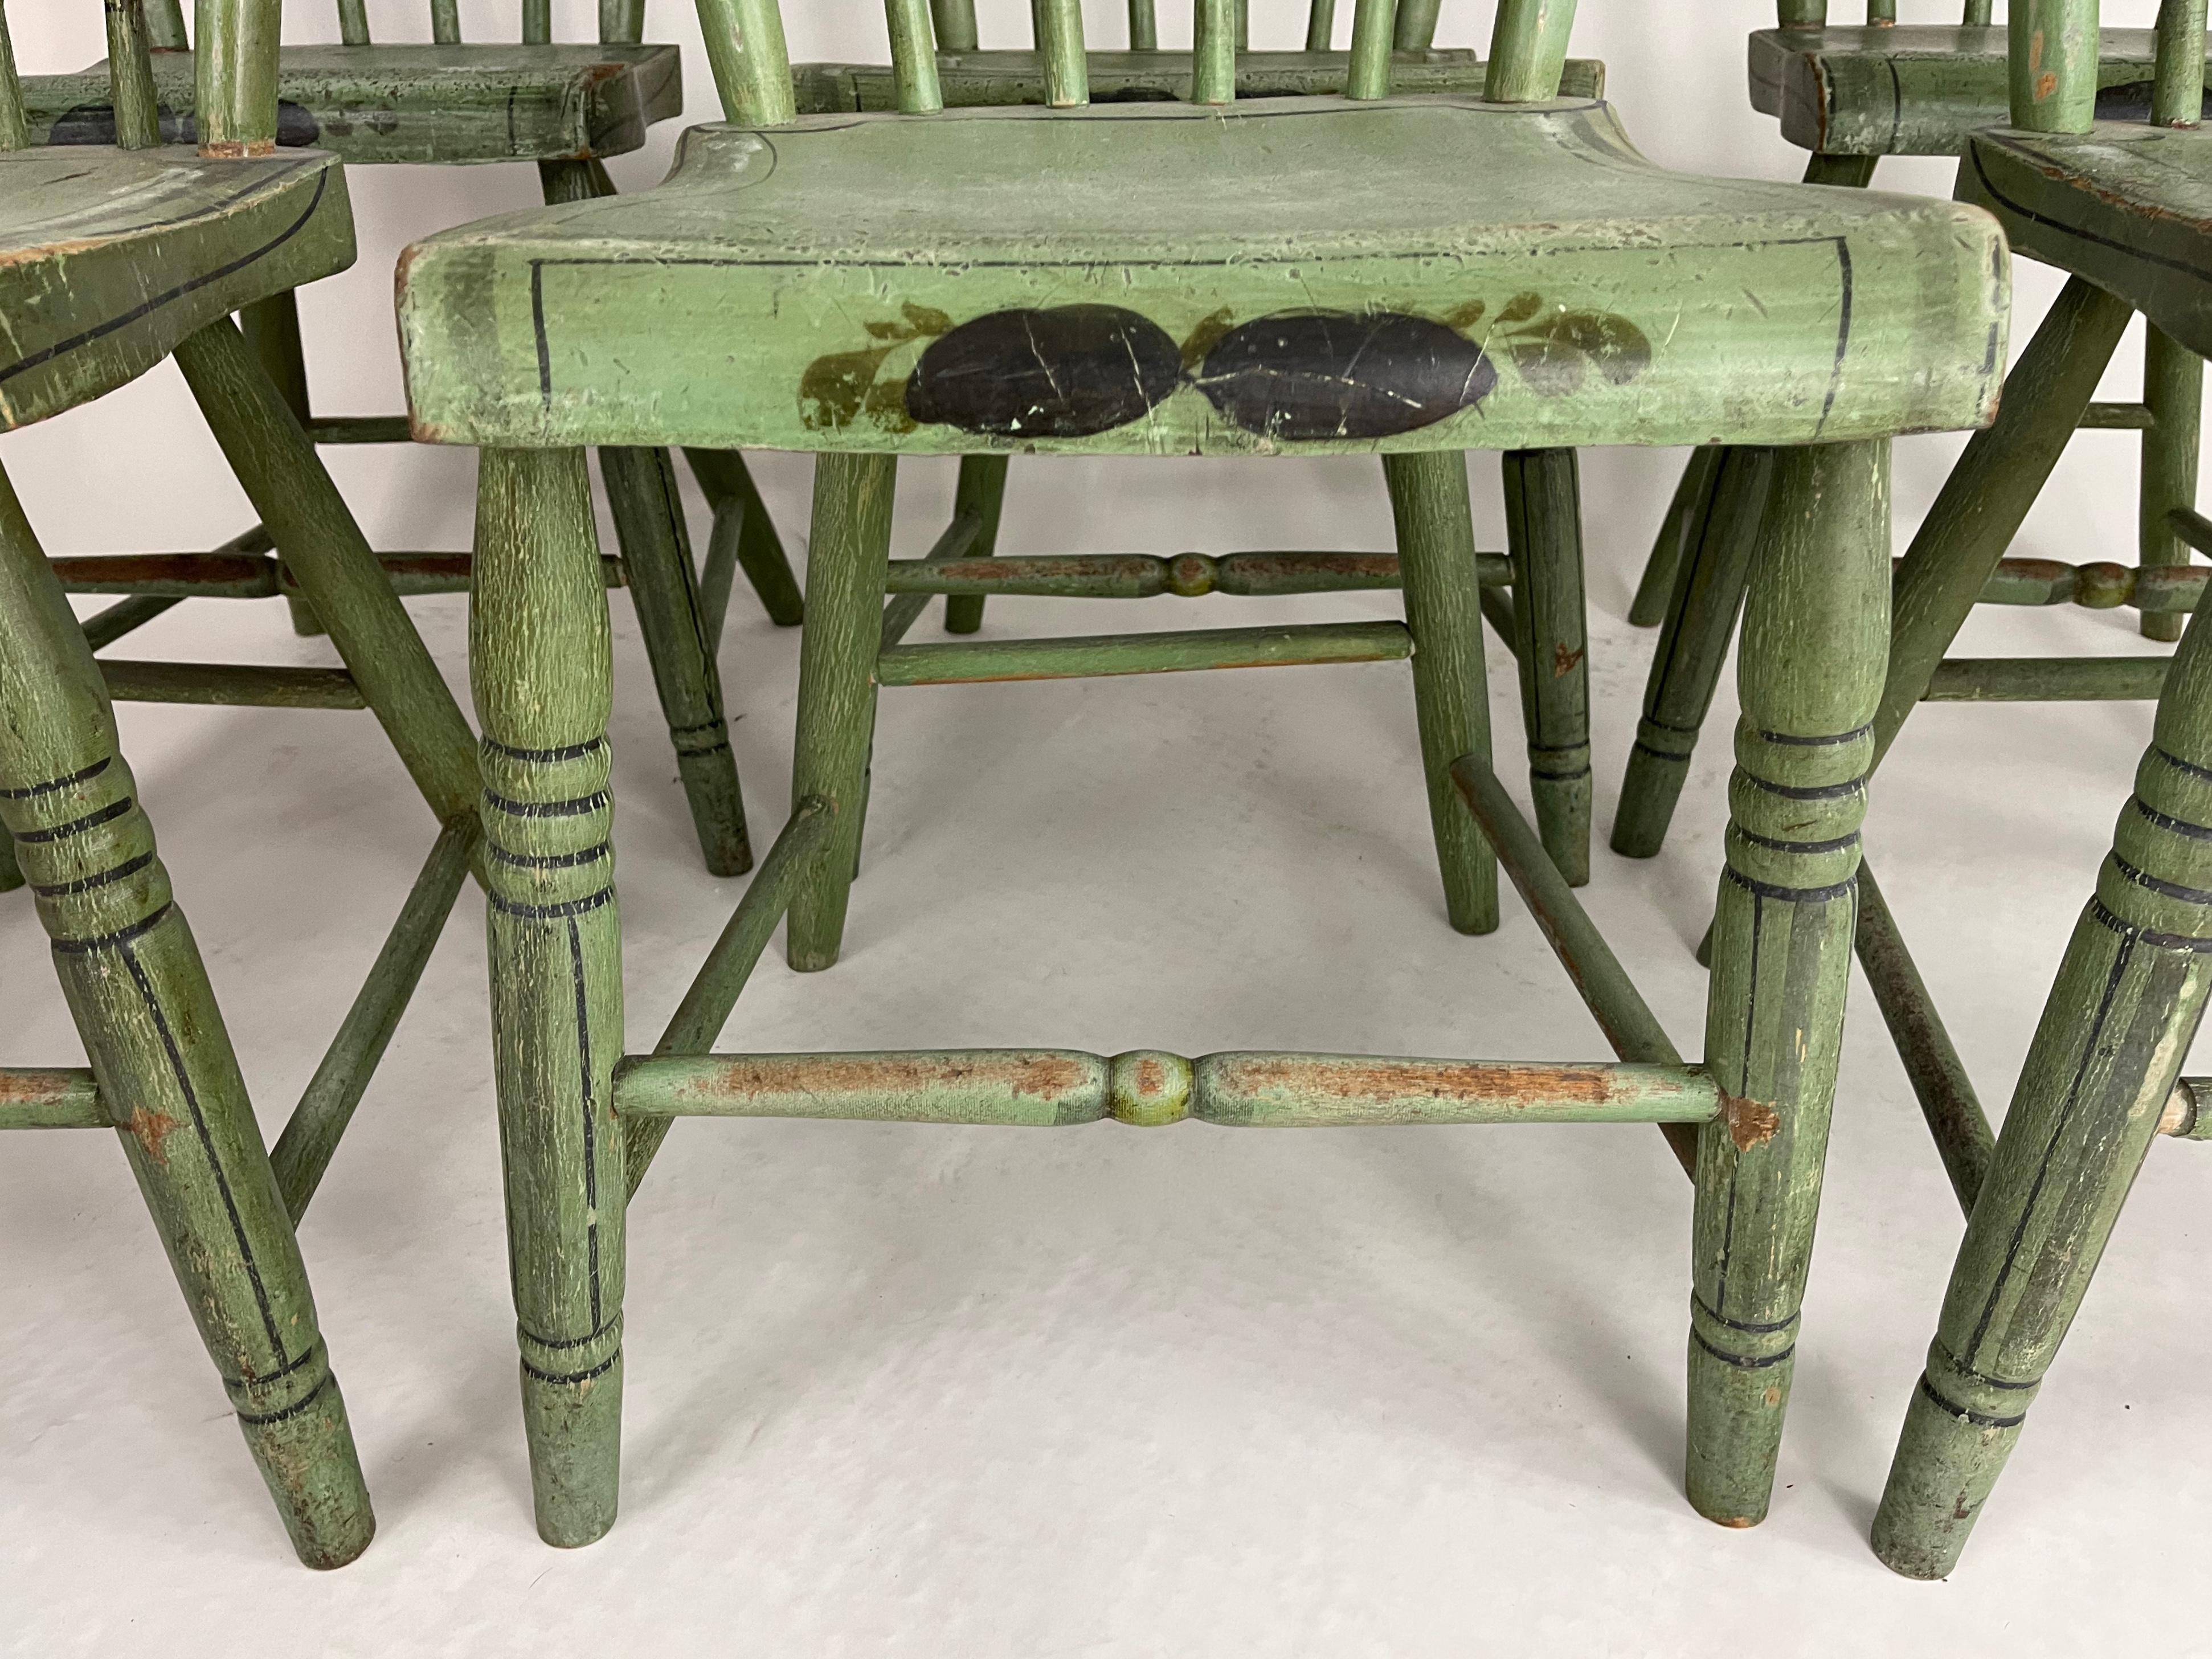 Set of 6 19th Century American Country Green Painted Dining Chairs, c. 1820-30 11